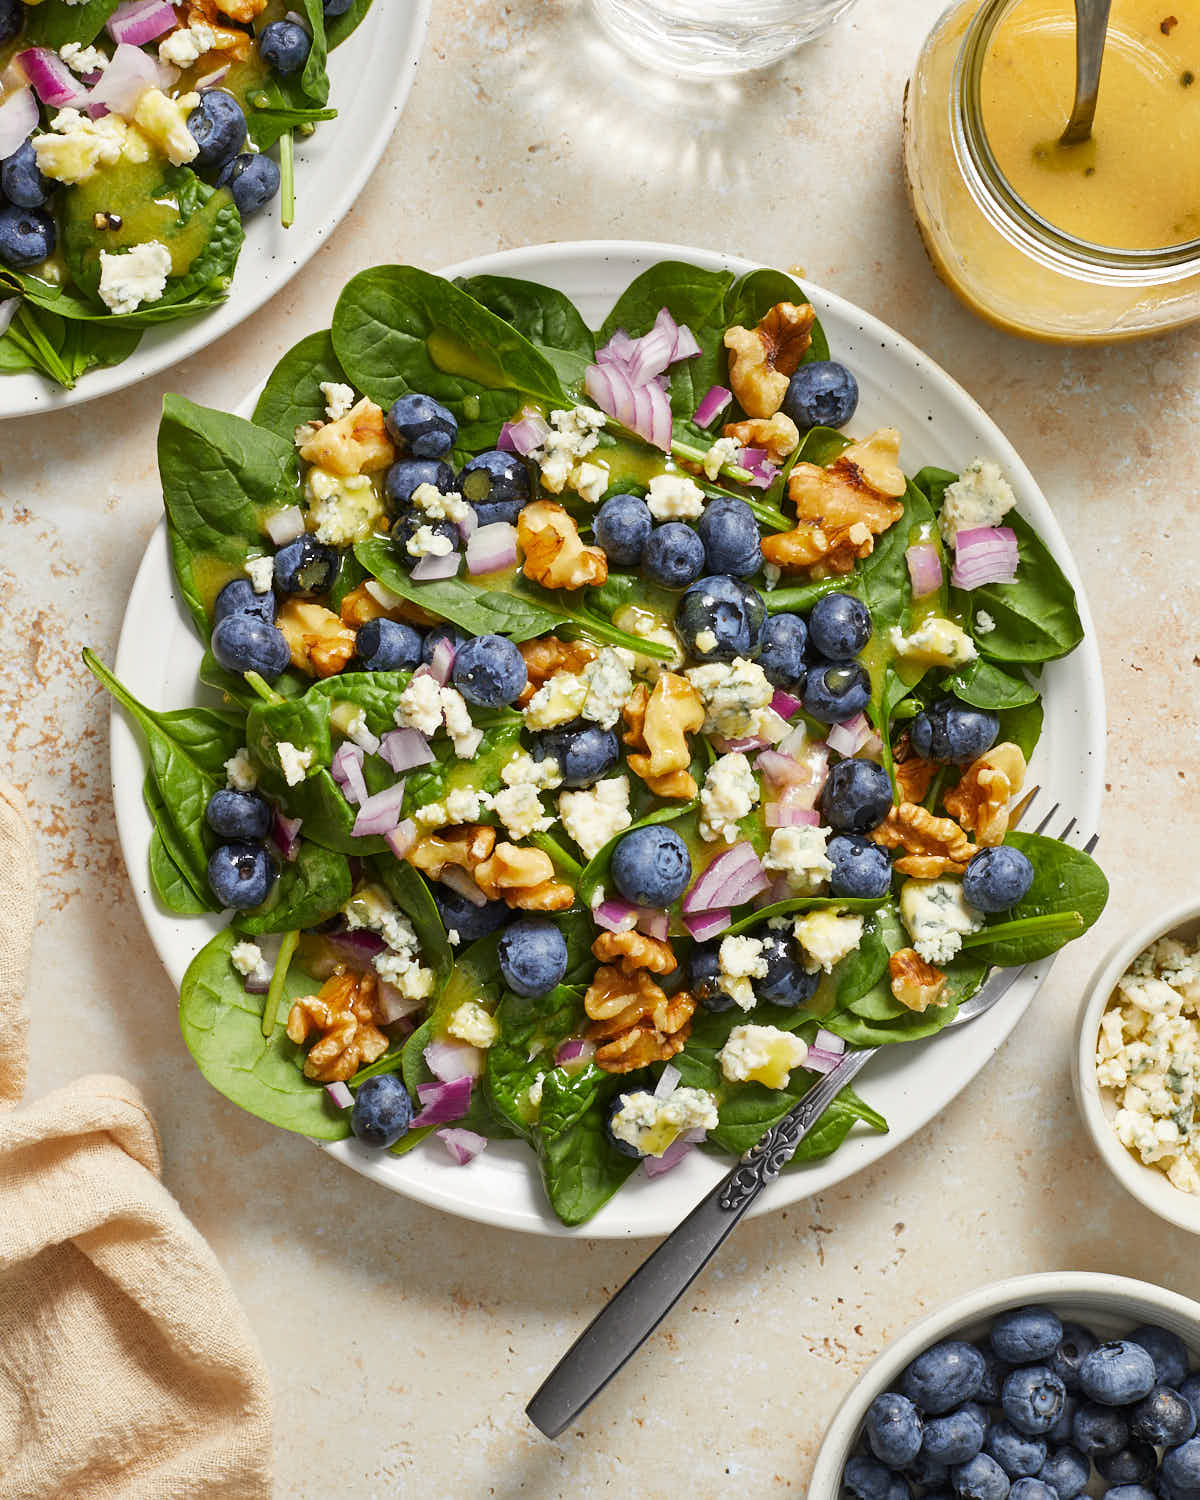 Overhead view of blueberry spinach salad on a white plate with dressing, blue cheese and blueberries off to the side.